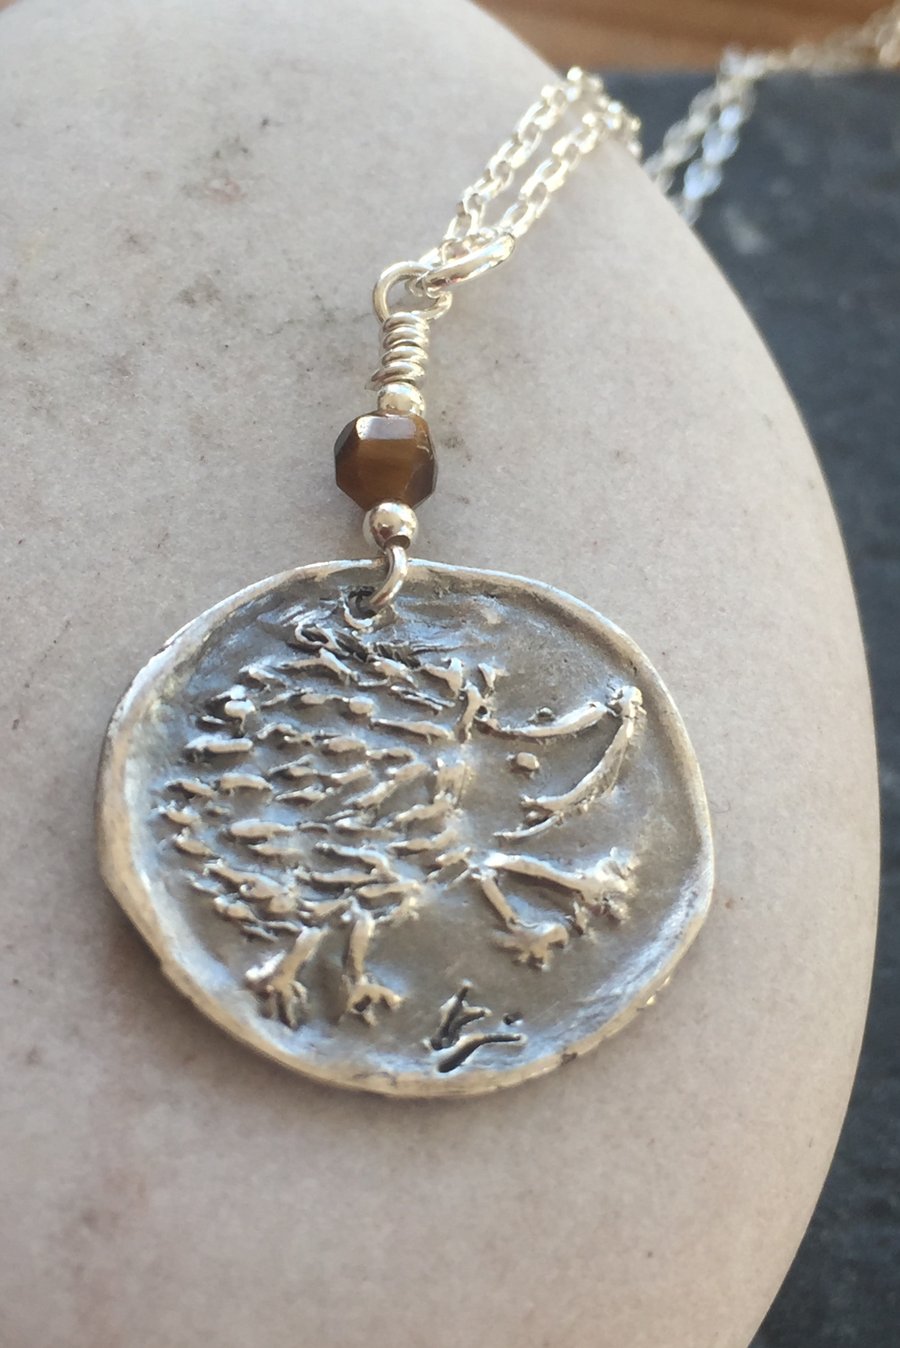 Hedgehog pendant in fine and sterling silver